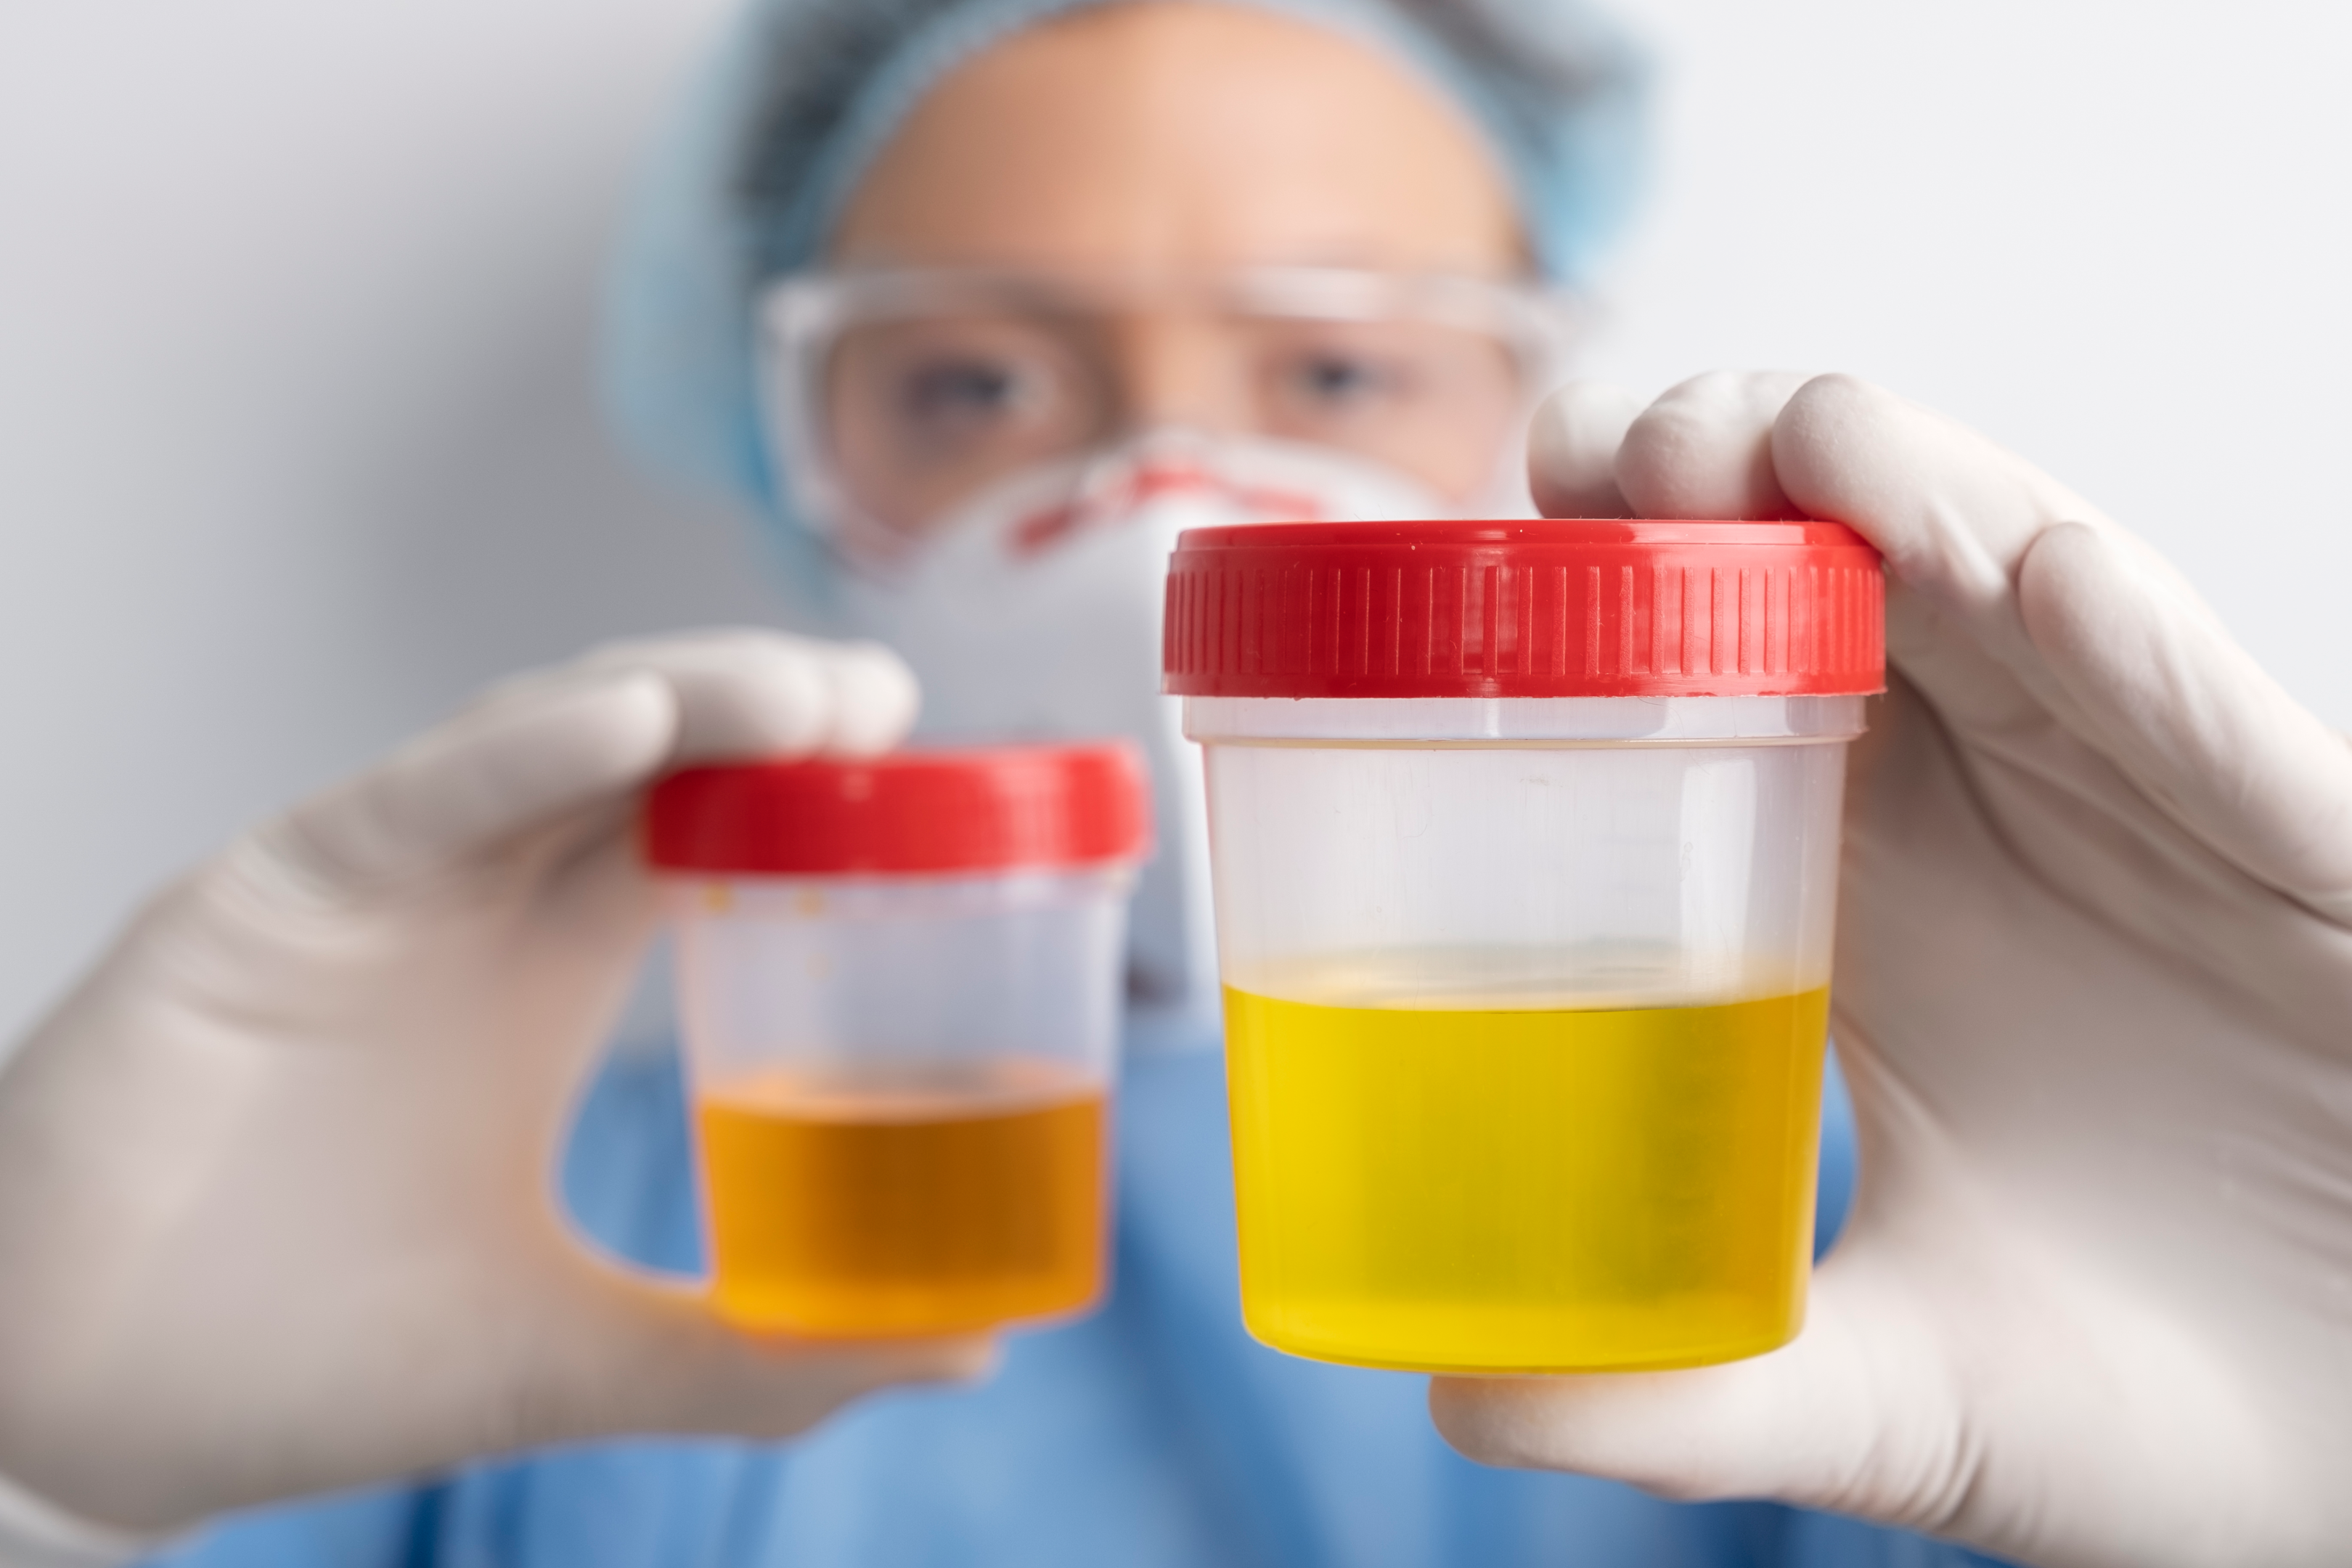 The reproductive health tests are often conducted on urine samples.